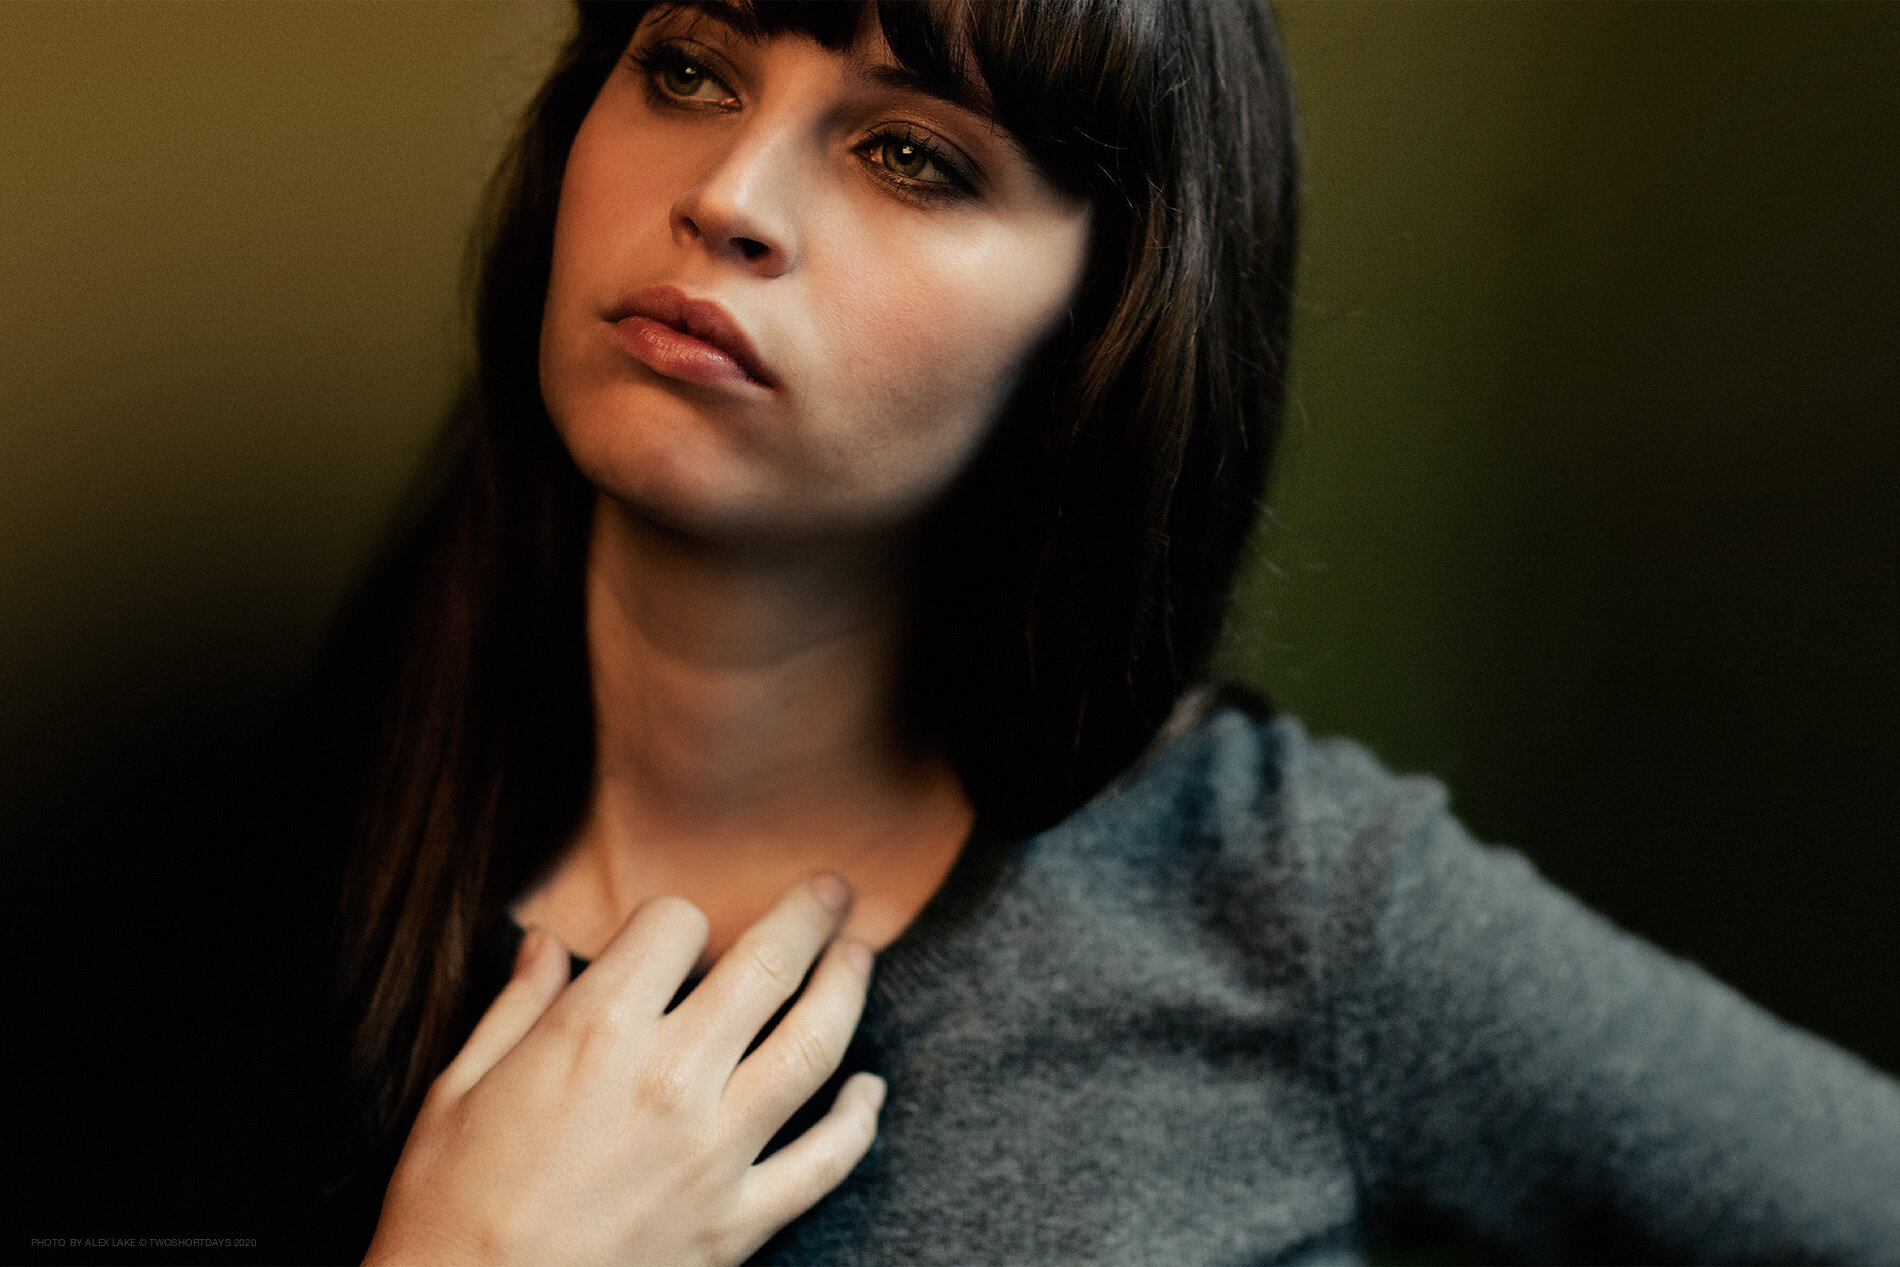 felicity_jones_photography_copyright_ALEX_LAKE_do_not_reproduce_without_permission_TWOSHORTDAYS.jpg